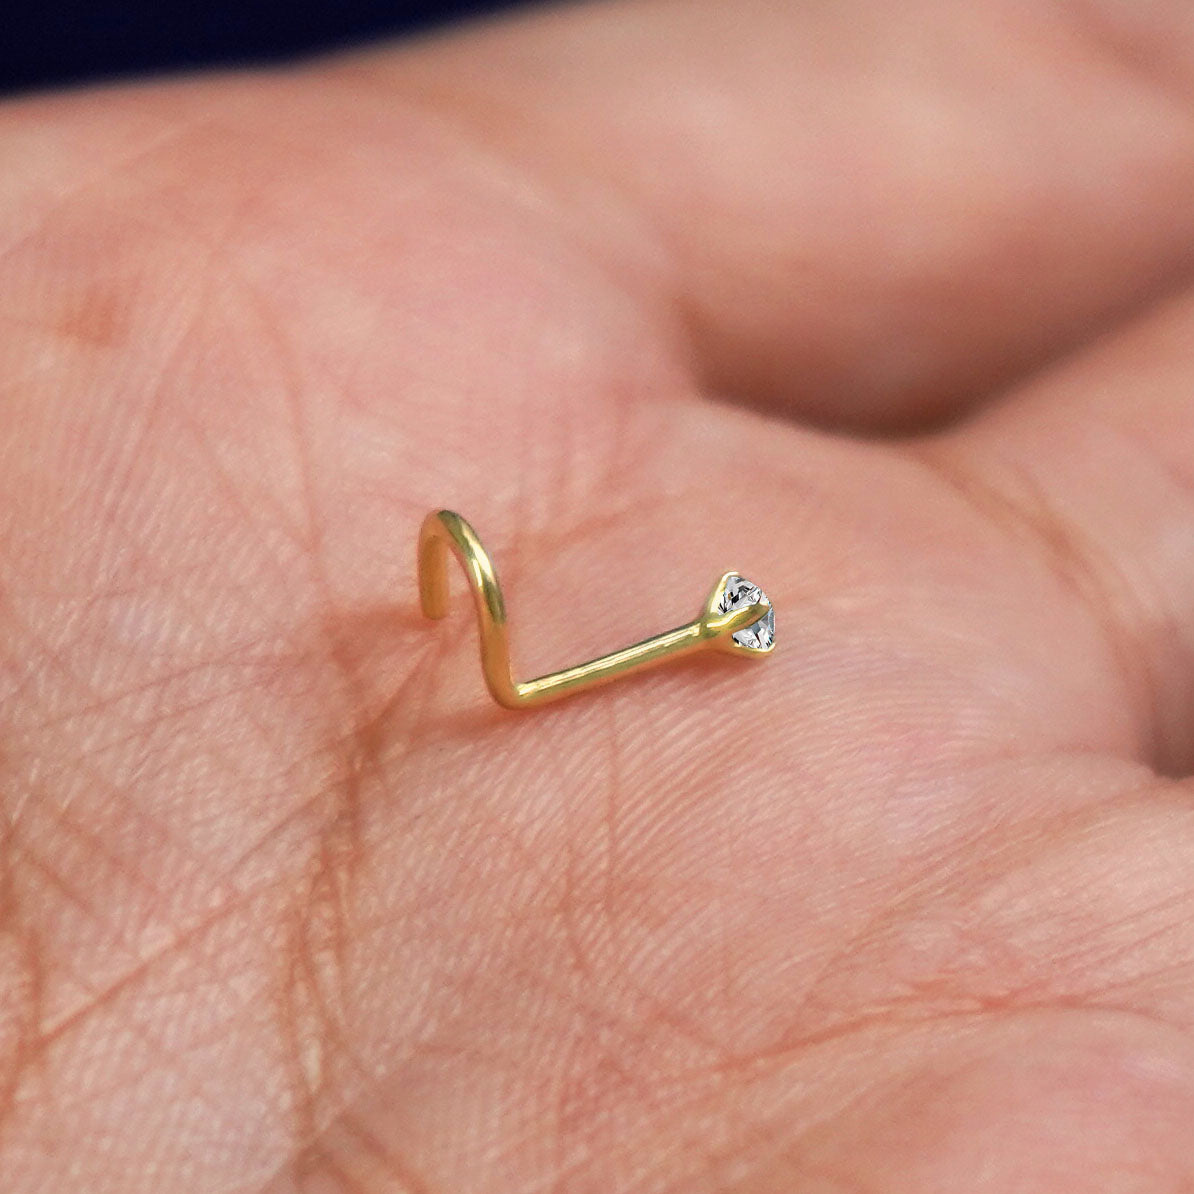 A model's palm holding a Diamond Nose Stud to show the details of the screw